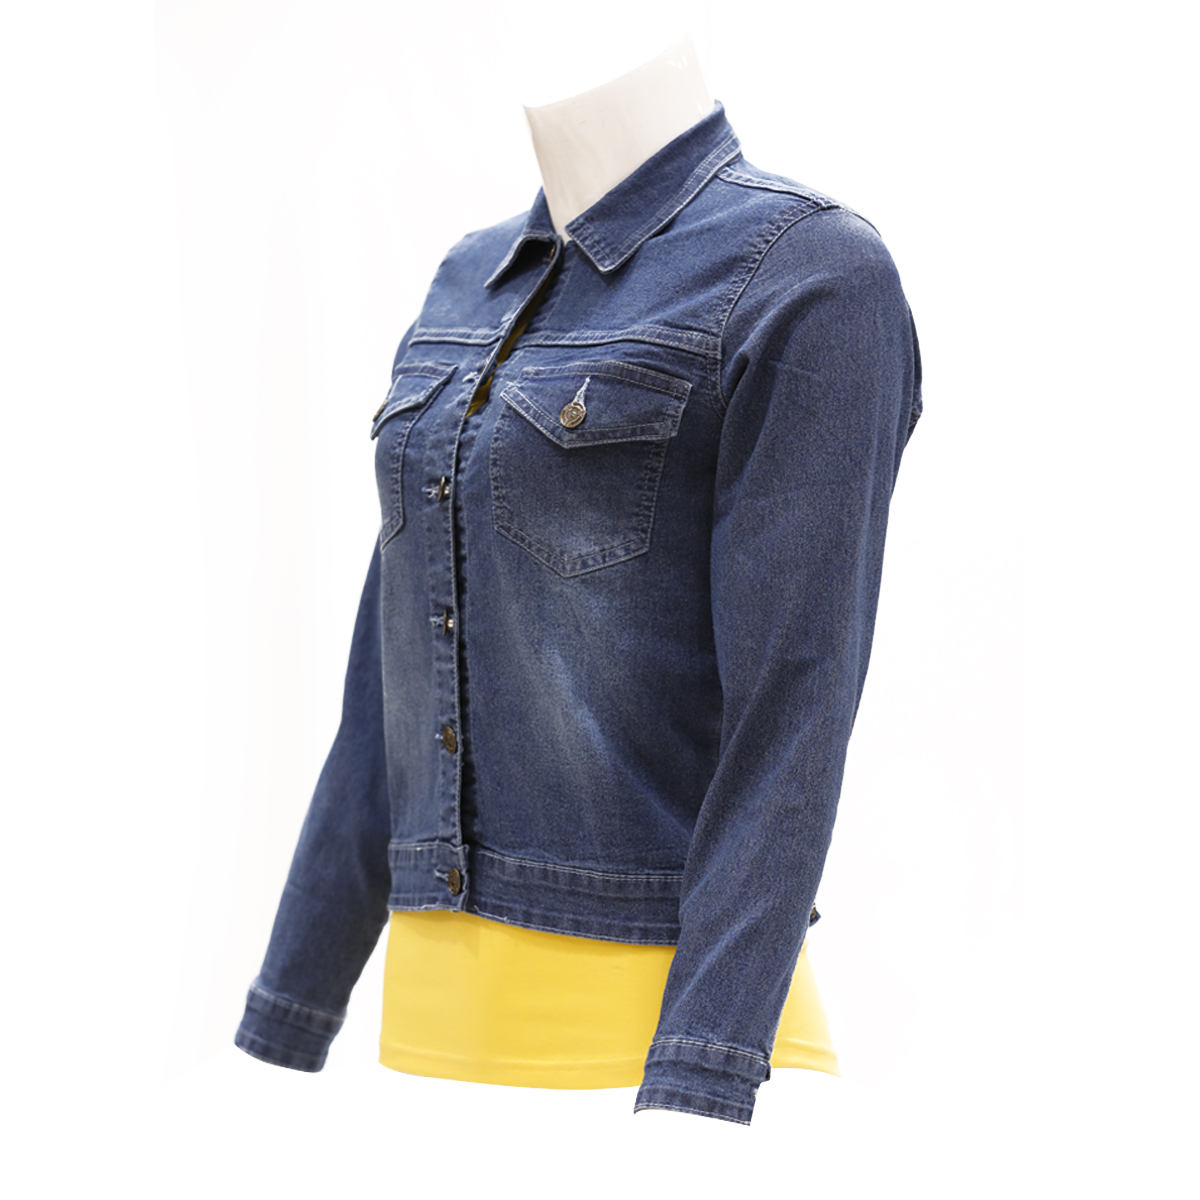 Zola Full Sleeve Denim Jacket Styled With 2 Patch Pockets - Stone/Mid Blue, Size-L